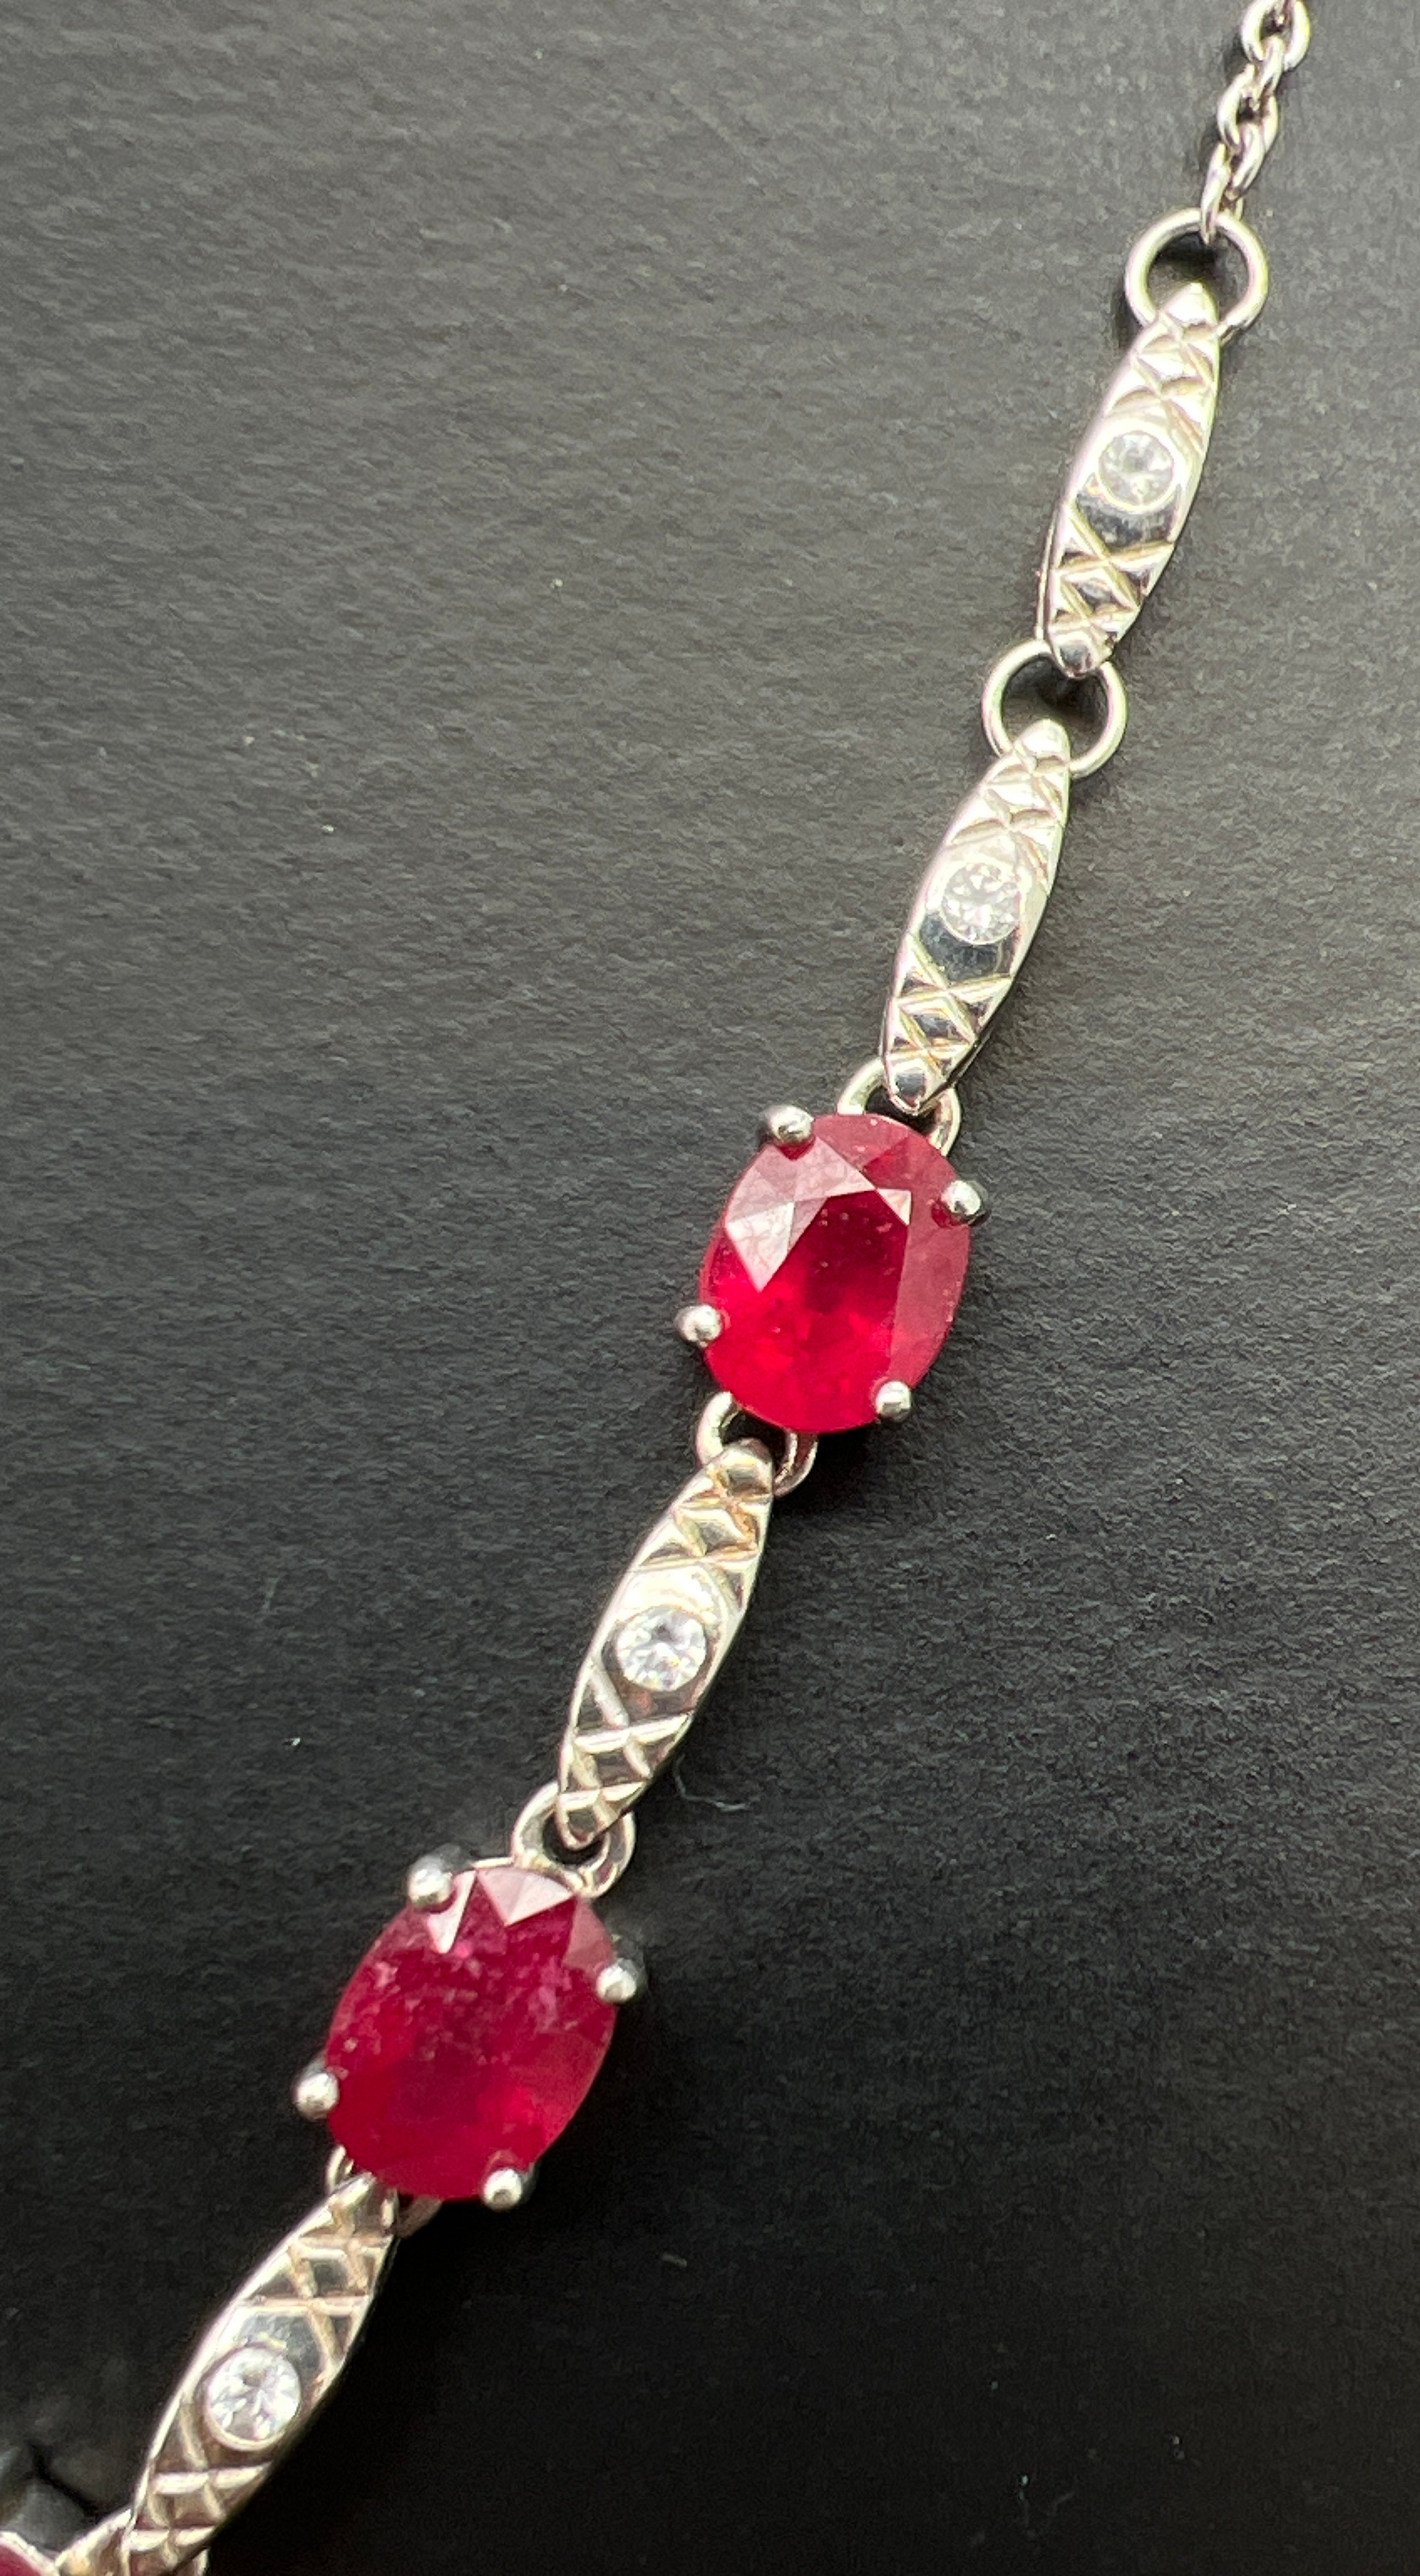 A silver ruby and white topaz fixed drop pendant necklace with spring ring clasp, by The Genuine Gem - Image 3 of 3